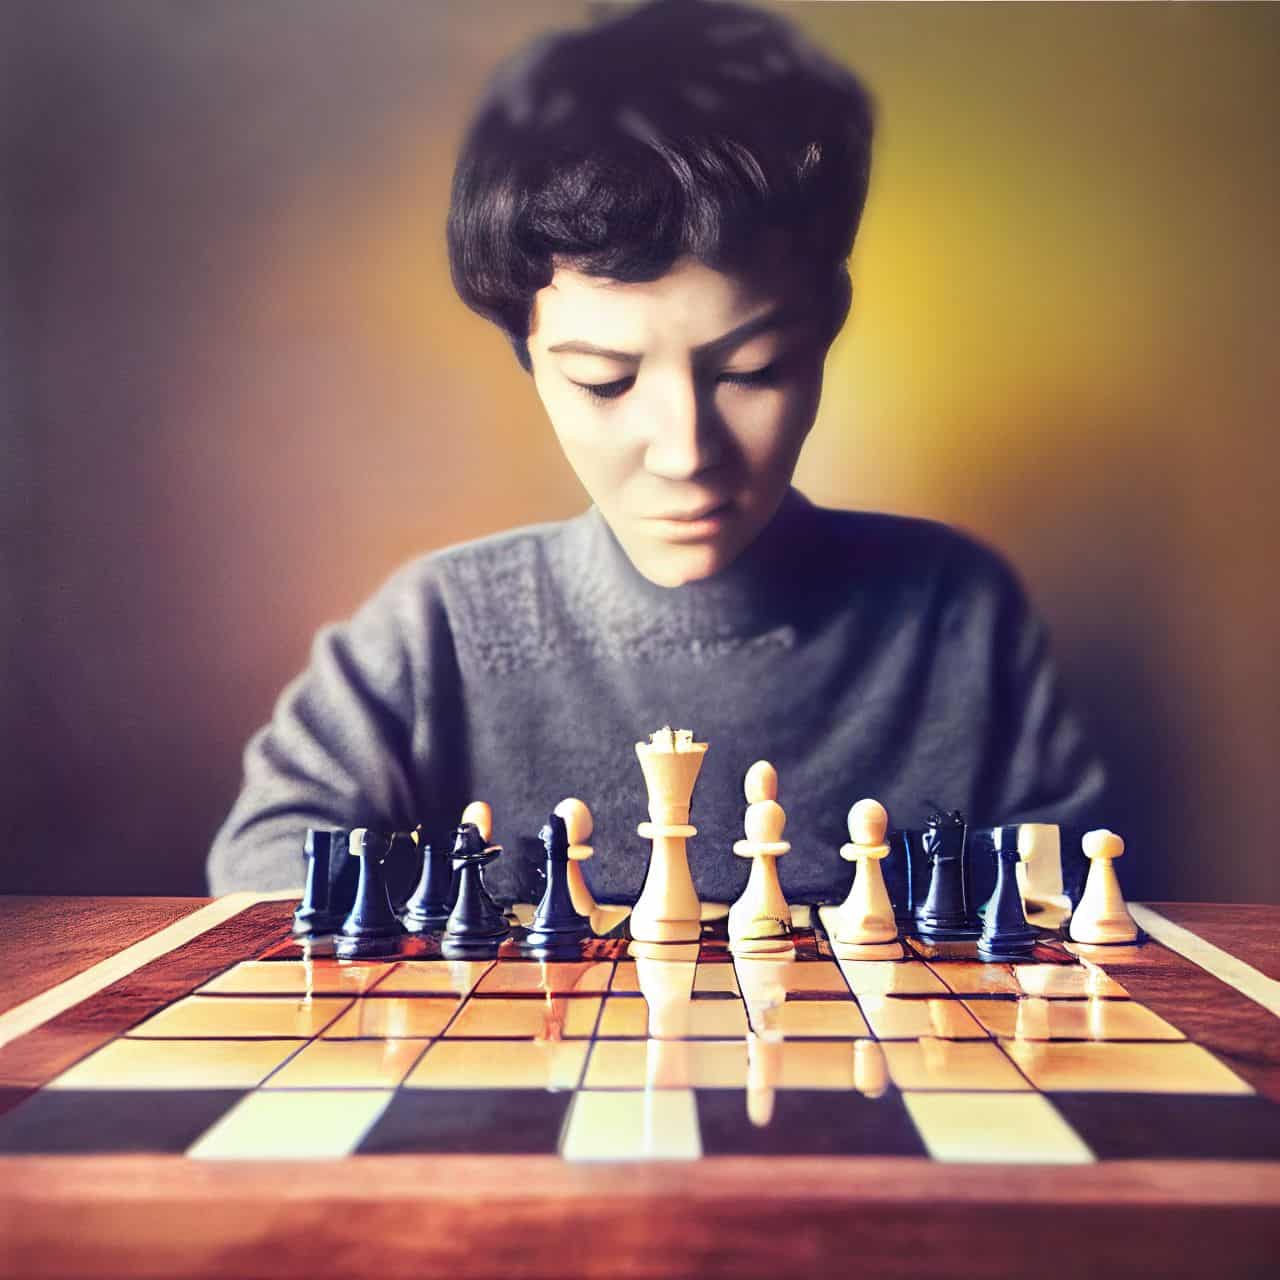 a person playing chess by themselves 2